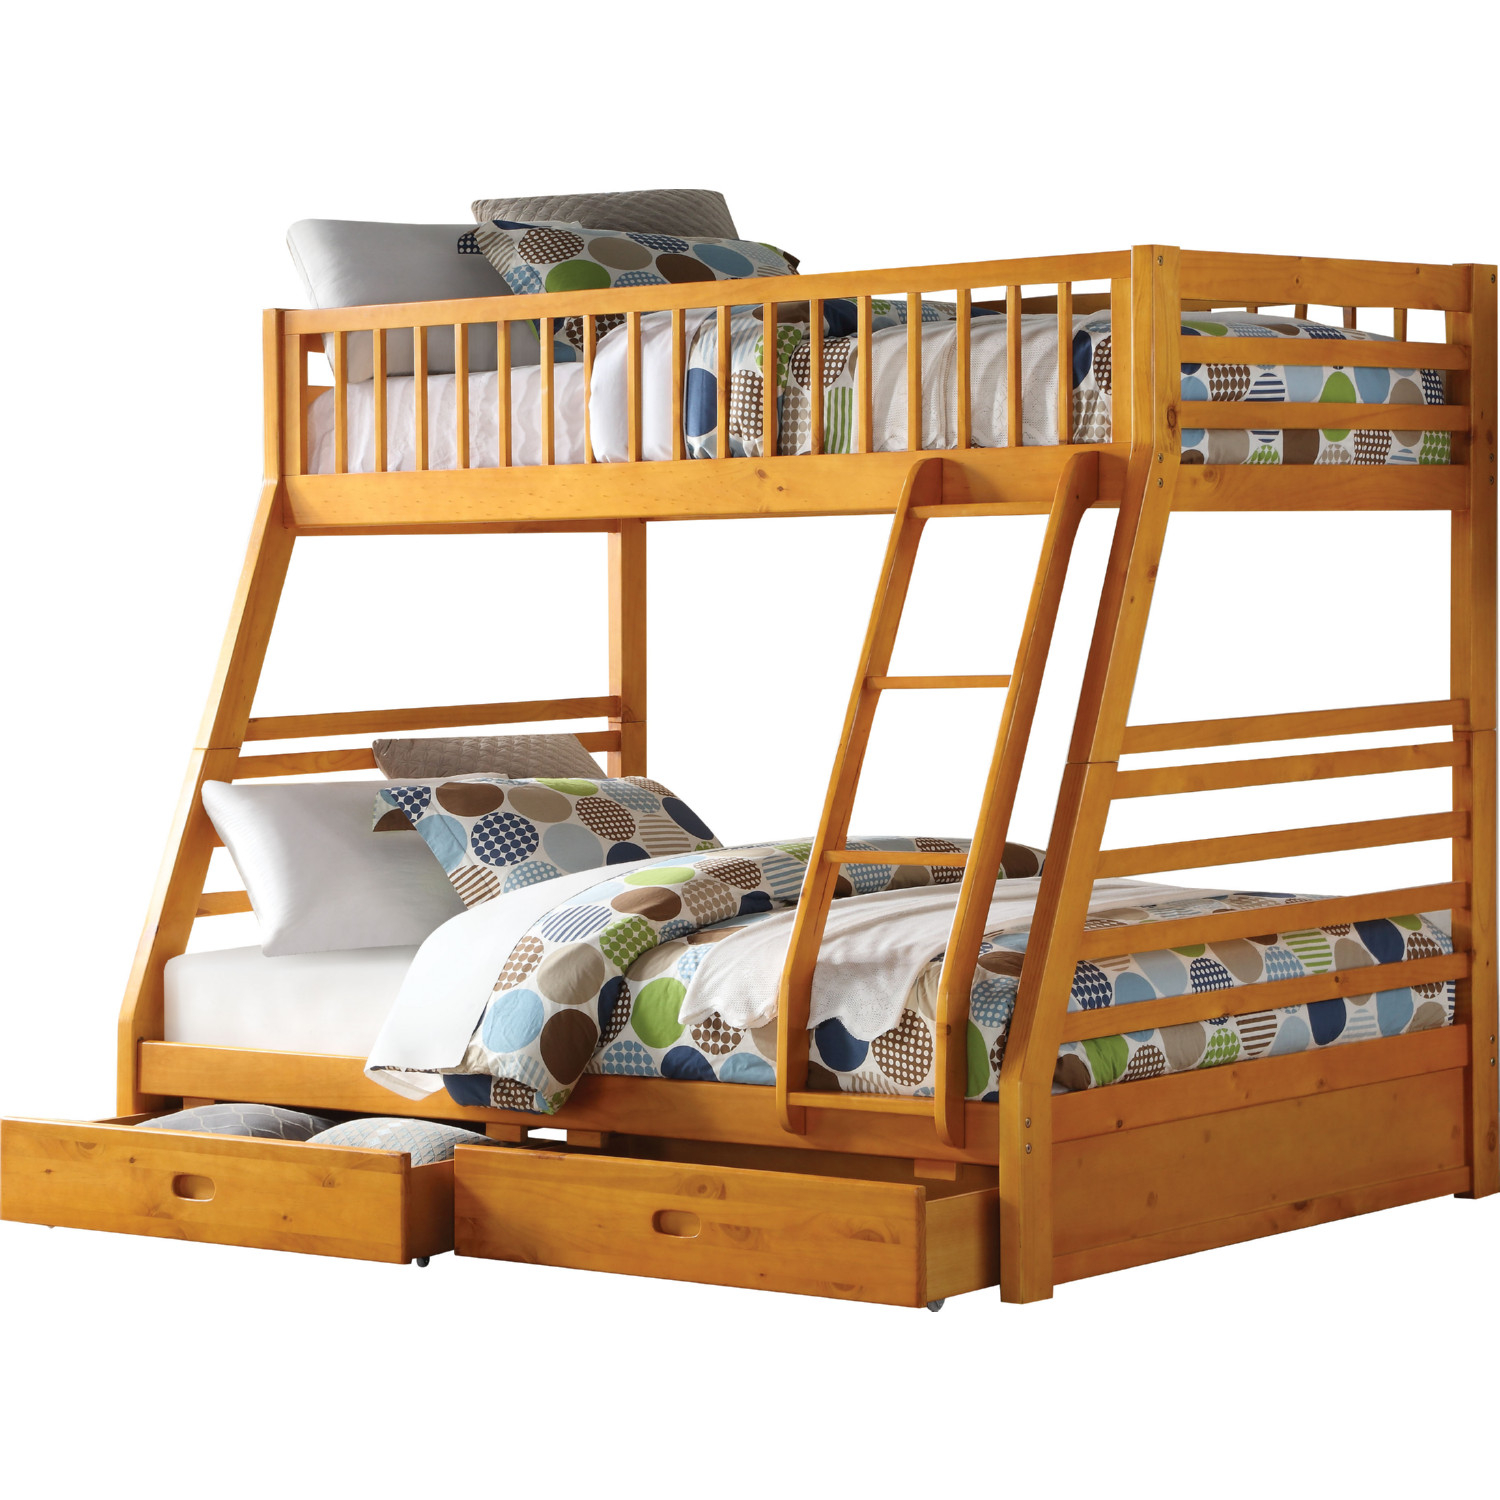 Acme 2020 Jason Twin Over Full Bunk Bed, Acme Furniture Jason Twin Over Full Bunk Bed Espresso